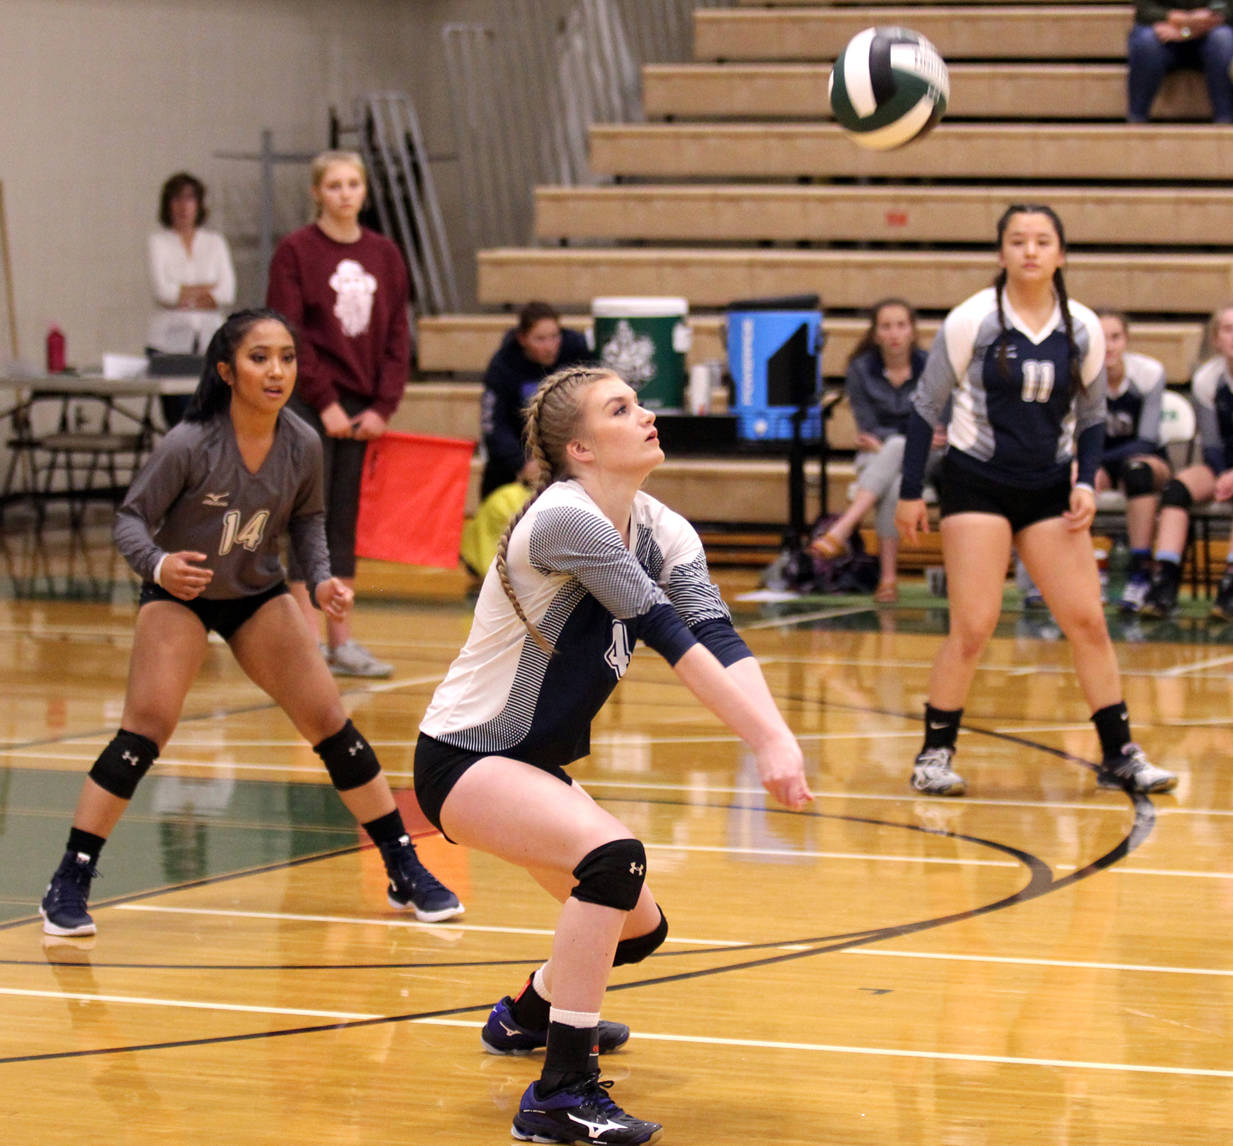 Soldotna junior Kodi McGillivray receives a serve during a 3-0 loss to Colony on Thursday, Aug. 24, 2017, at Colony High School. (Photo by Jeremiah Bartz/Frontiersman)